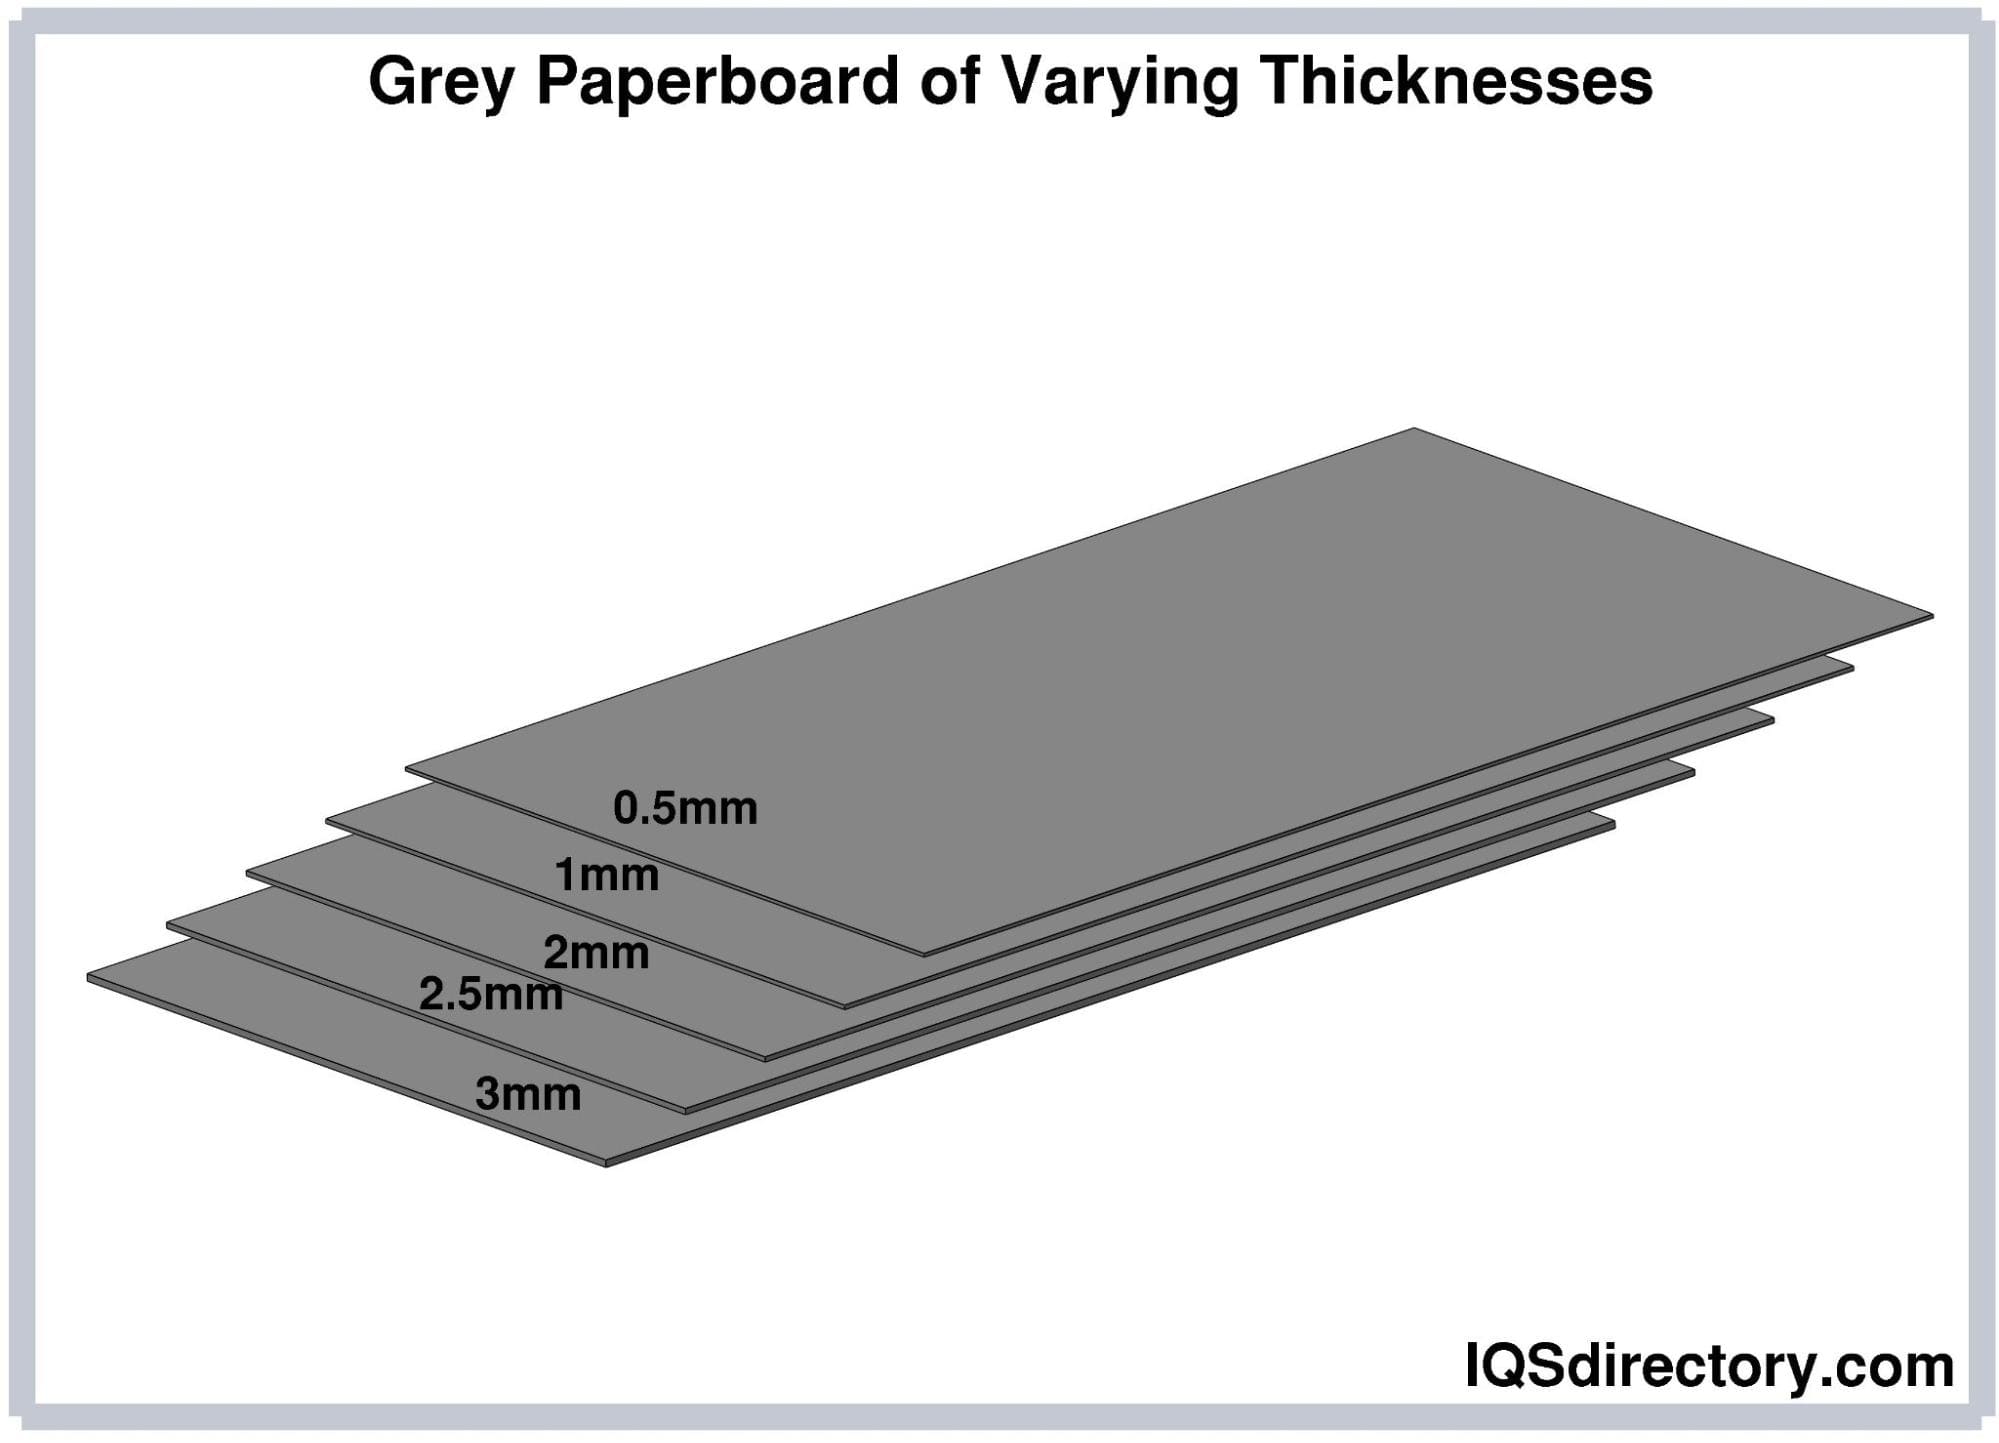 Grey Paperboard of Varying Thicknesses